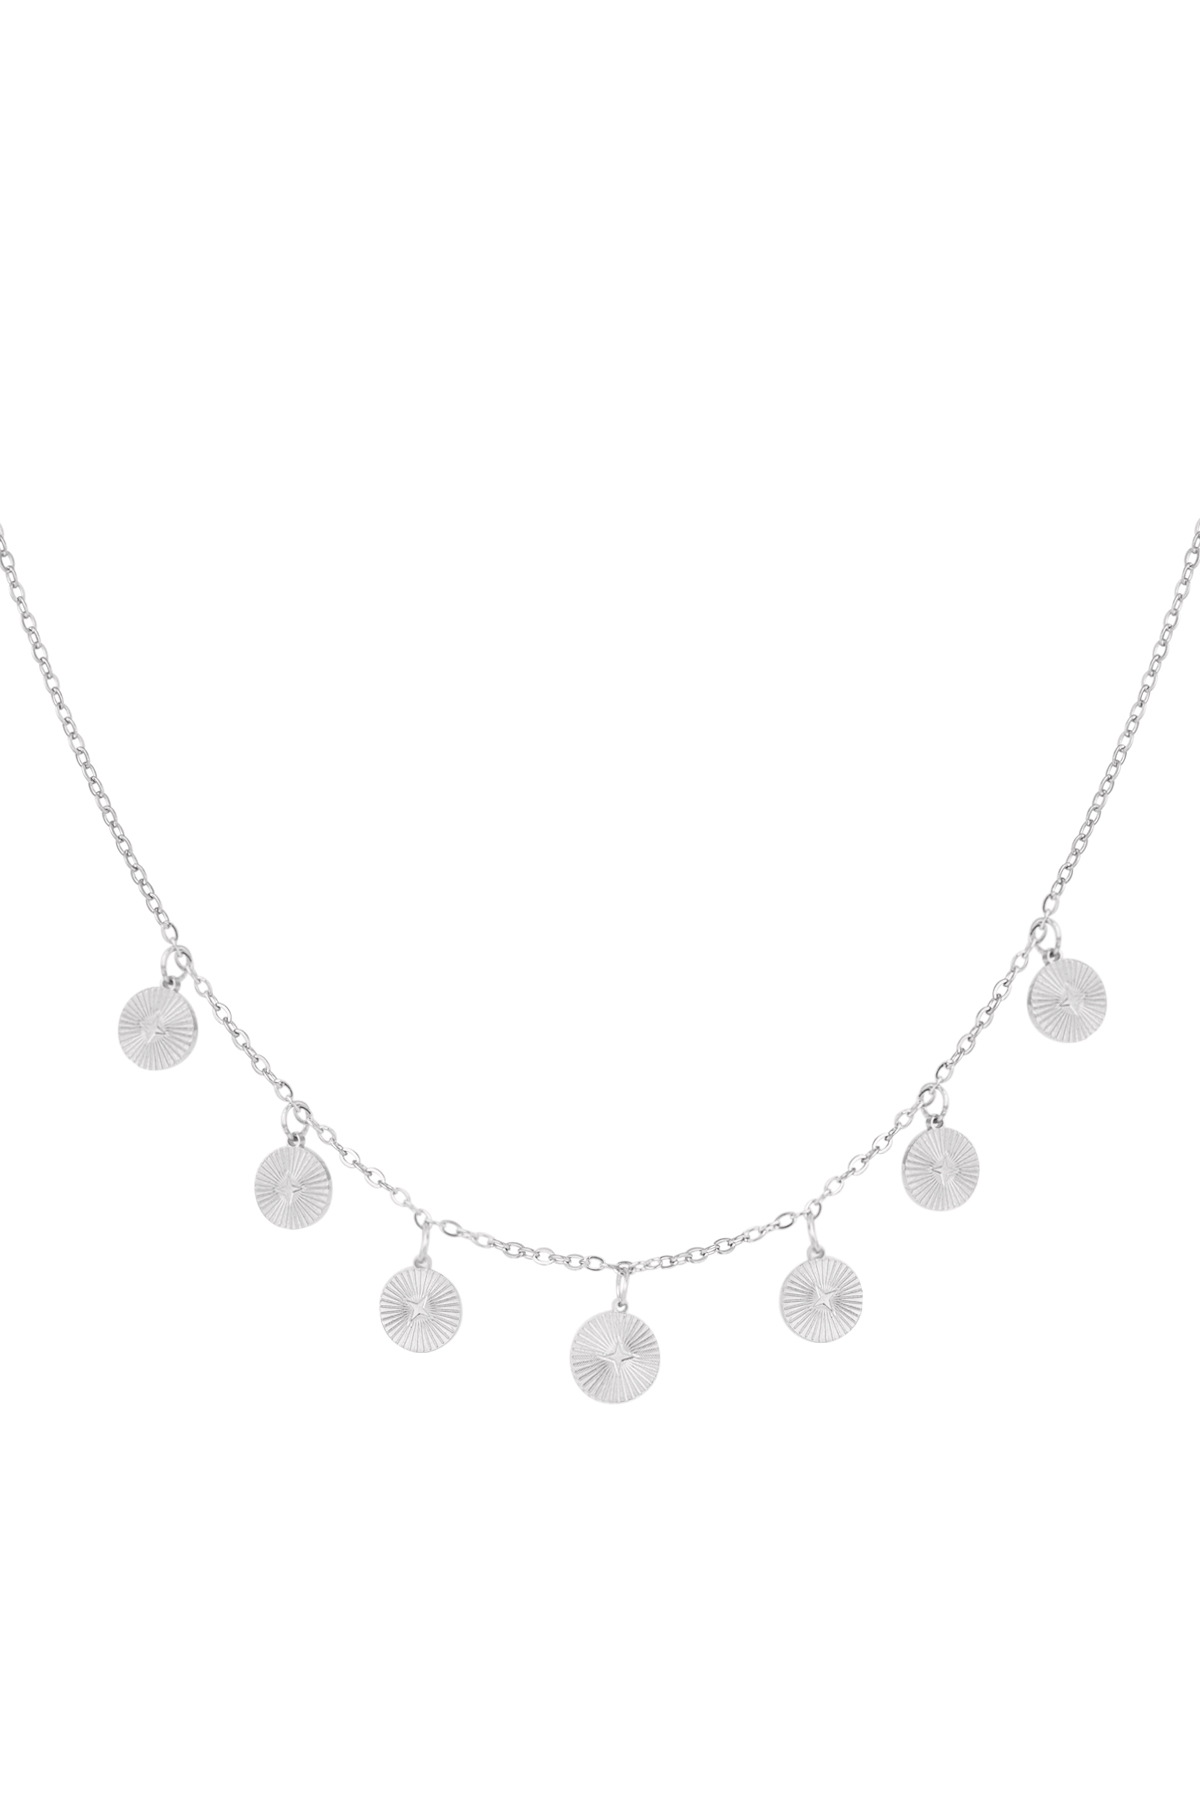 Necklace with coins - silver 